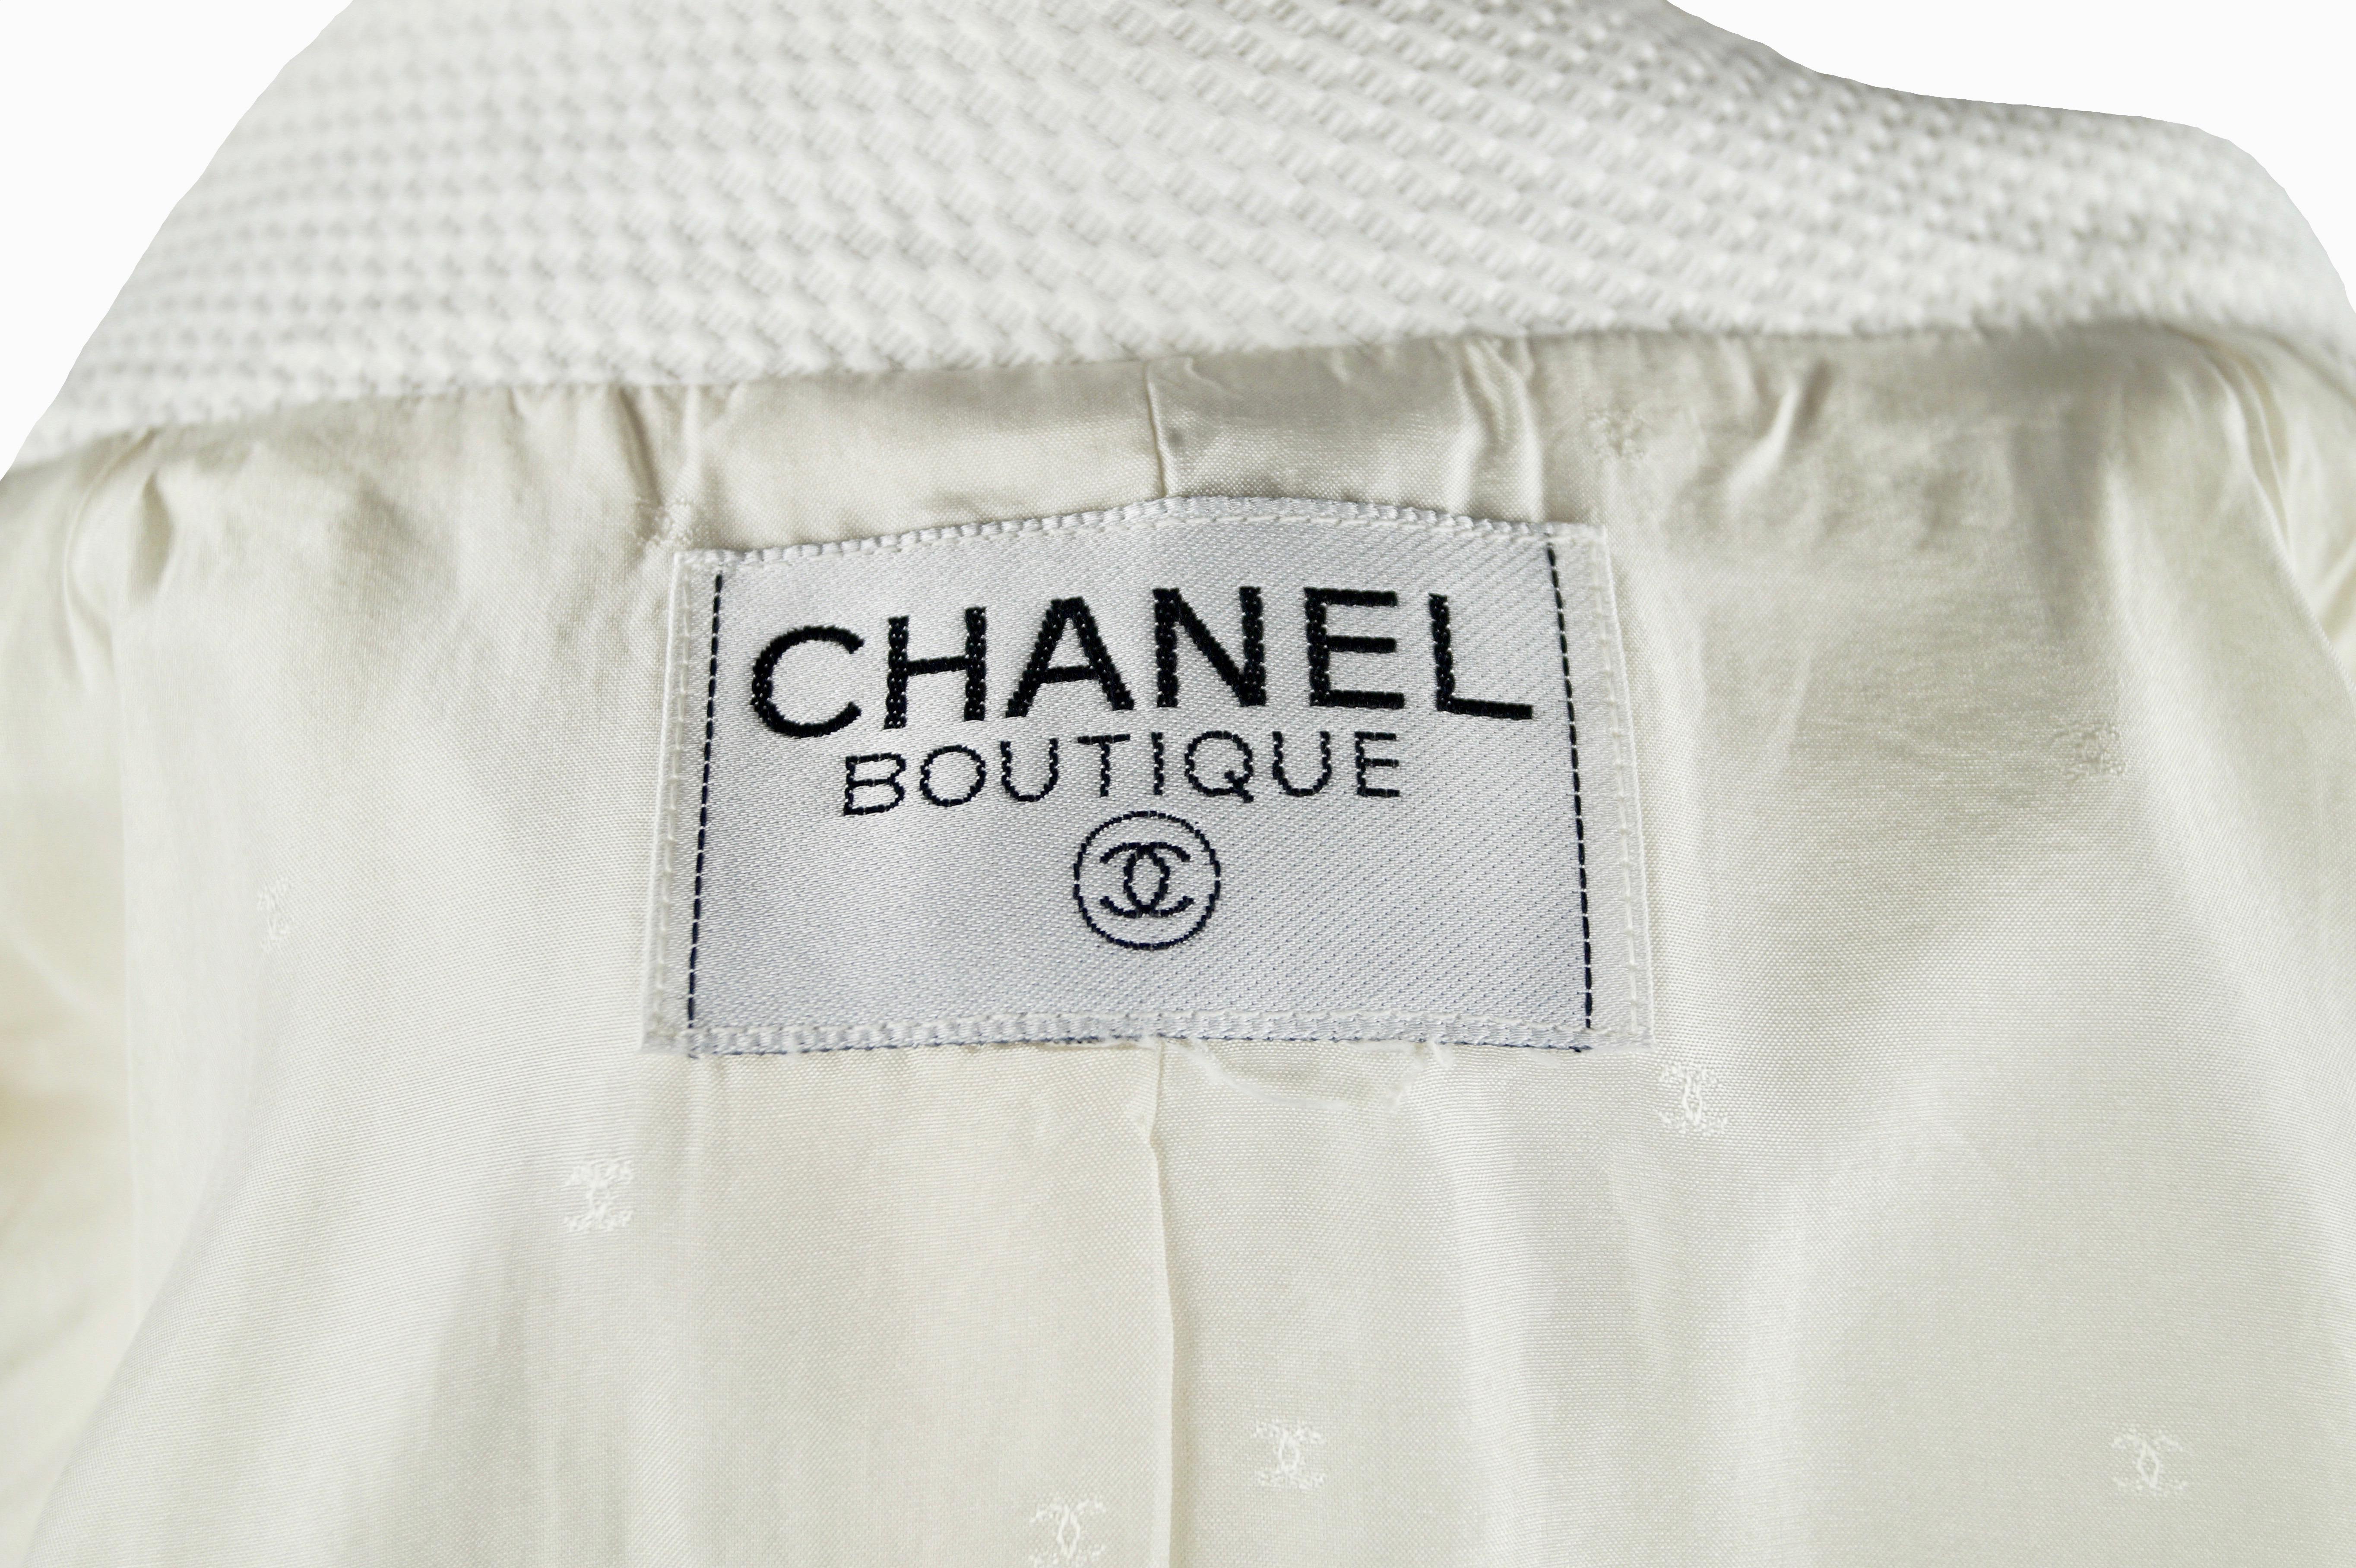 CHANEL boutique Suit white cotton jacket and skirt  late 80s For Sale 2